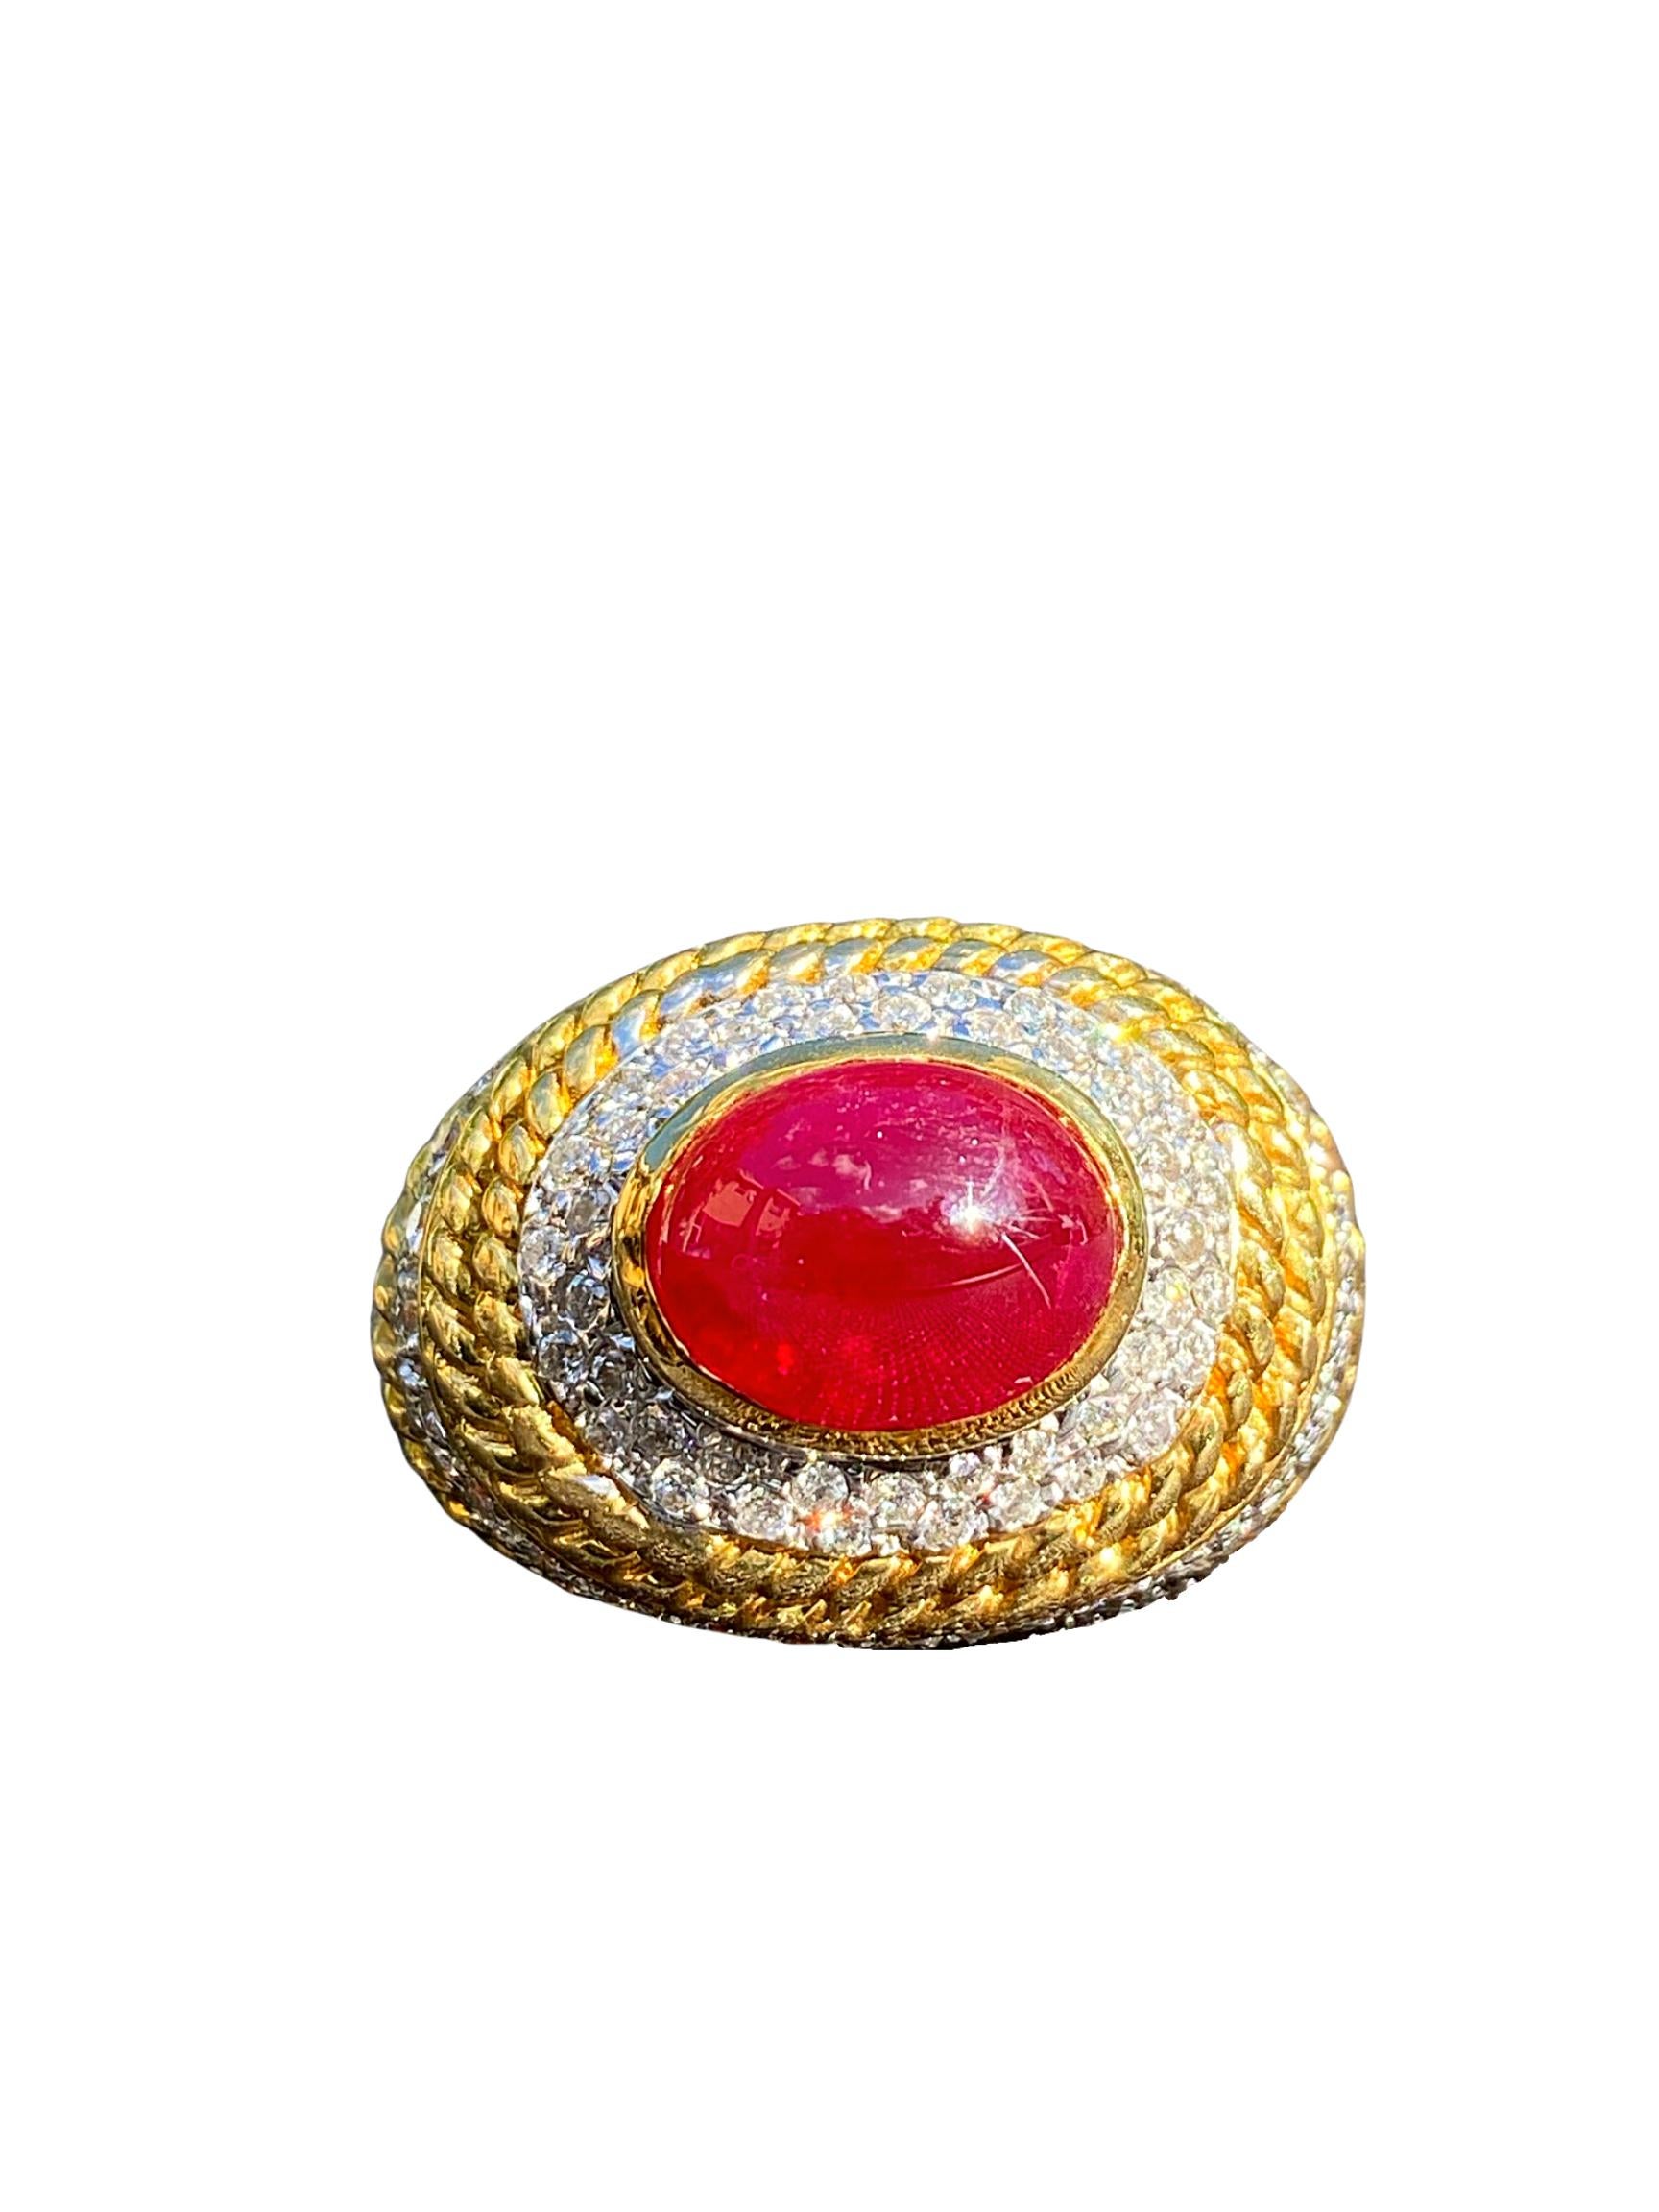 Centering a roughly ~3.00 Carat Cabochon-Cut Ruby, accented by around ~2.00 Carats Round-Brilliant Cut Diamonds, and set in an 18K Yellow Gold and White Gold blend, this ring is a true unisex classic!

Details:
✔ Center Stone: Ruby
✔ Stone Cut: